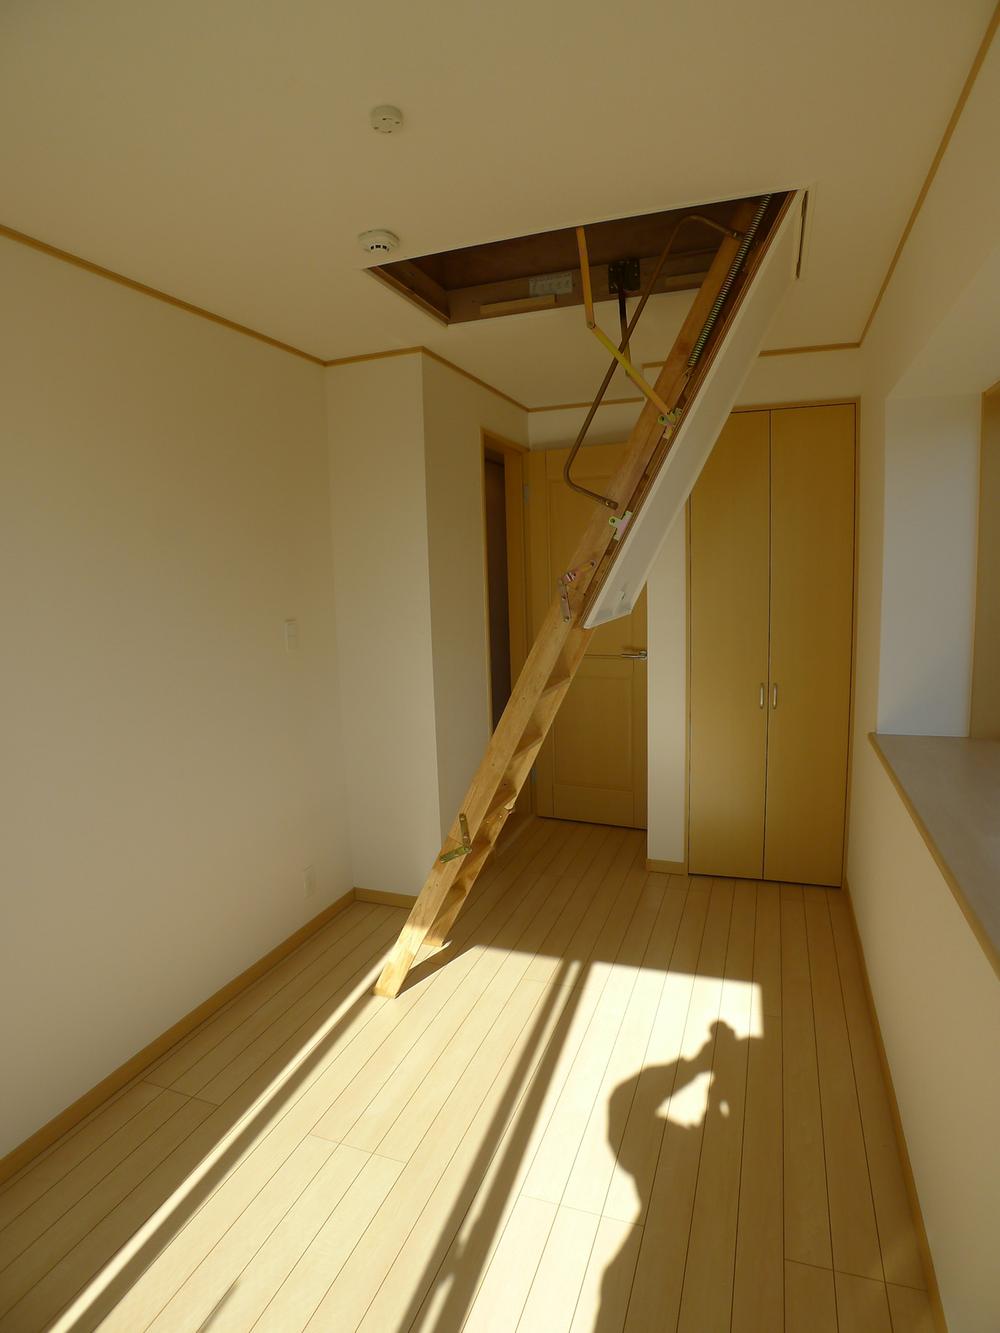 Same specifications photos (Other introspection). Same specifications photos (introspection) Attic storage stairs